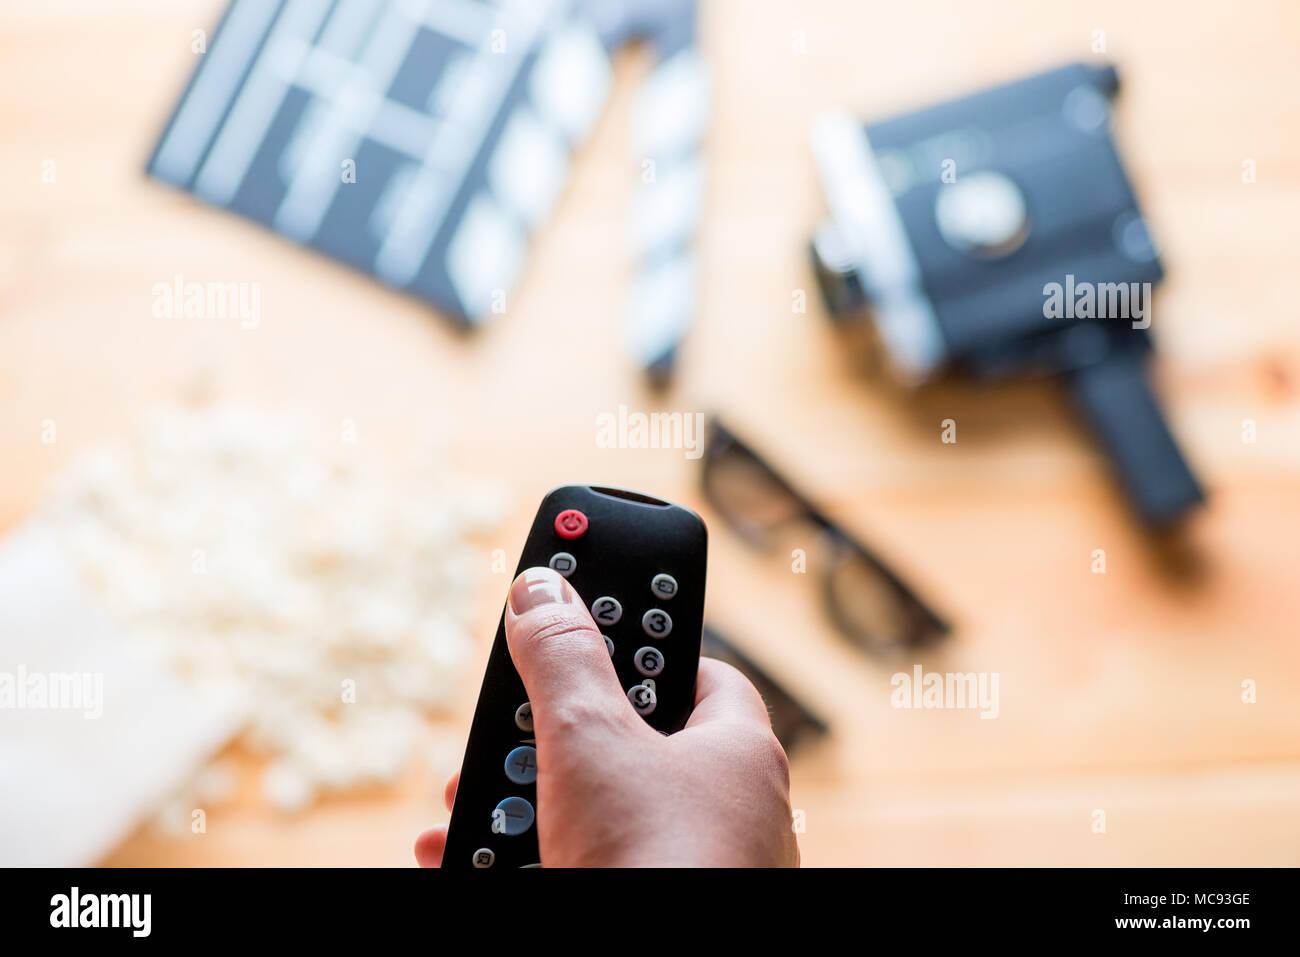 against the backdrop of the film industry objects close-up of TV remote in a female hand Stock Photo